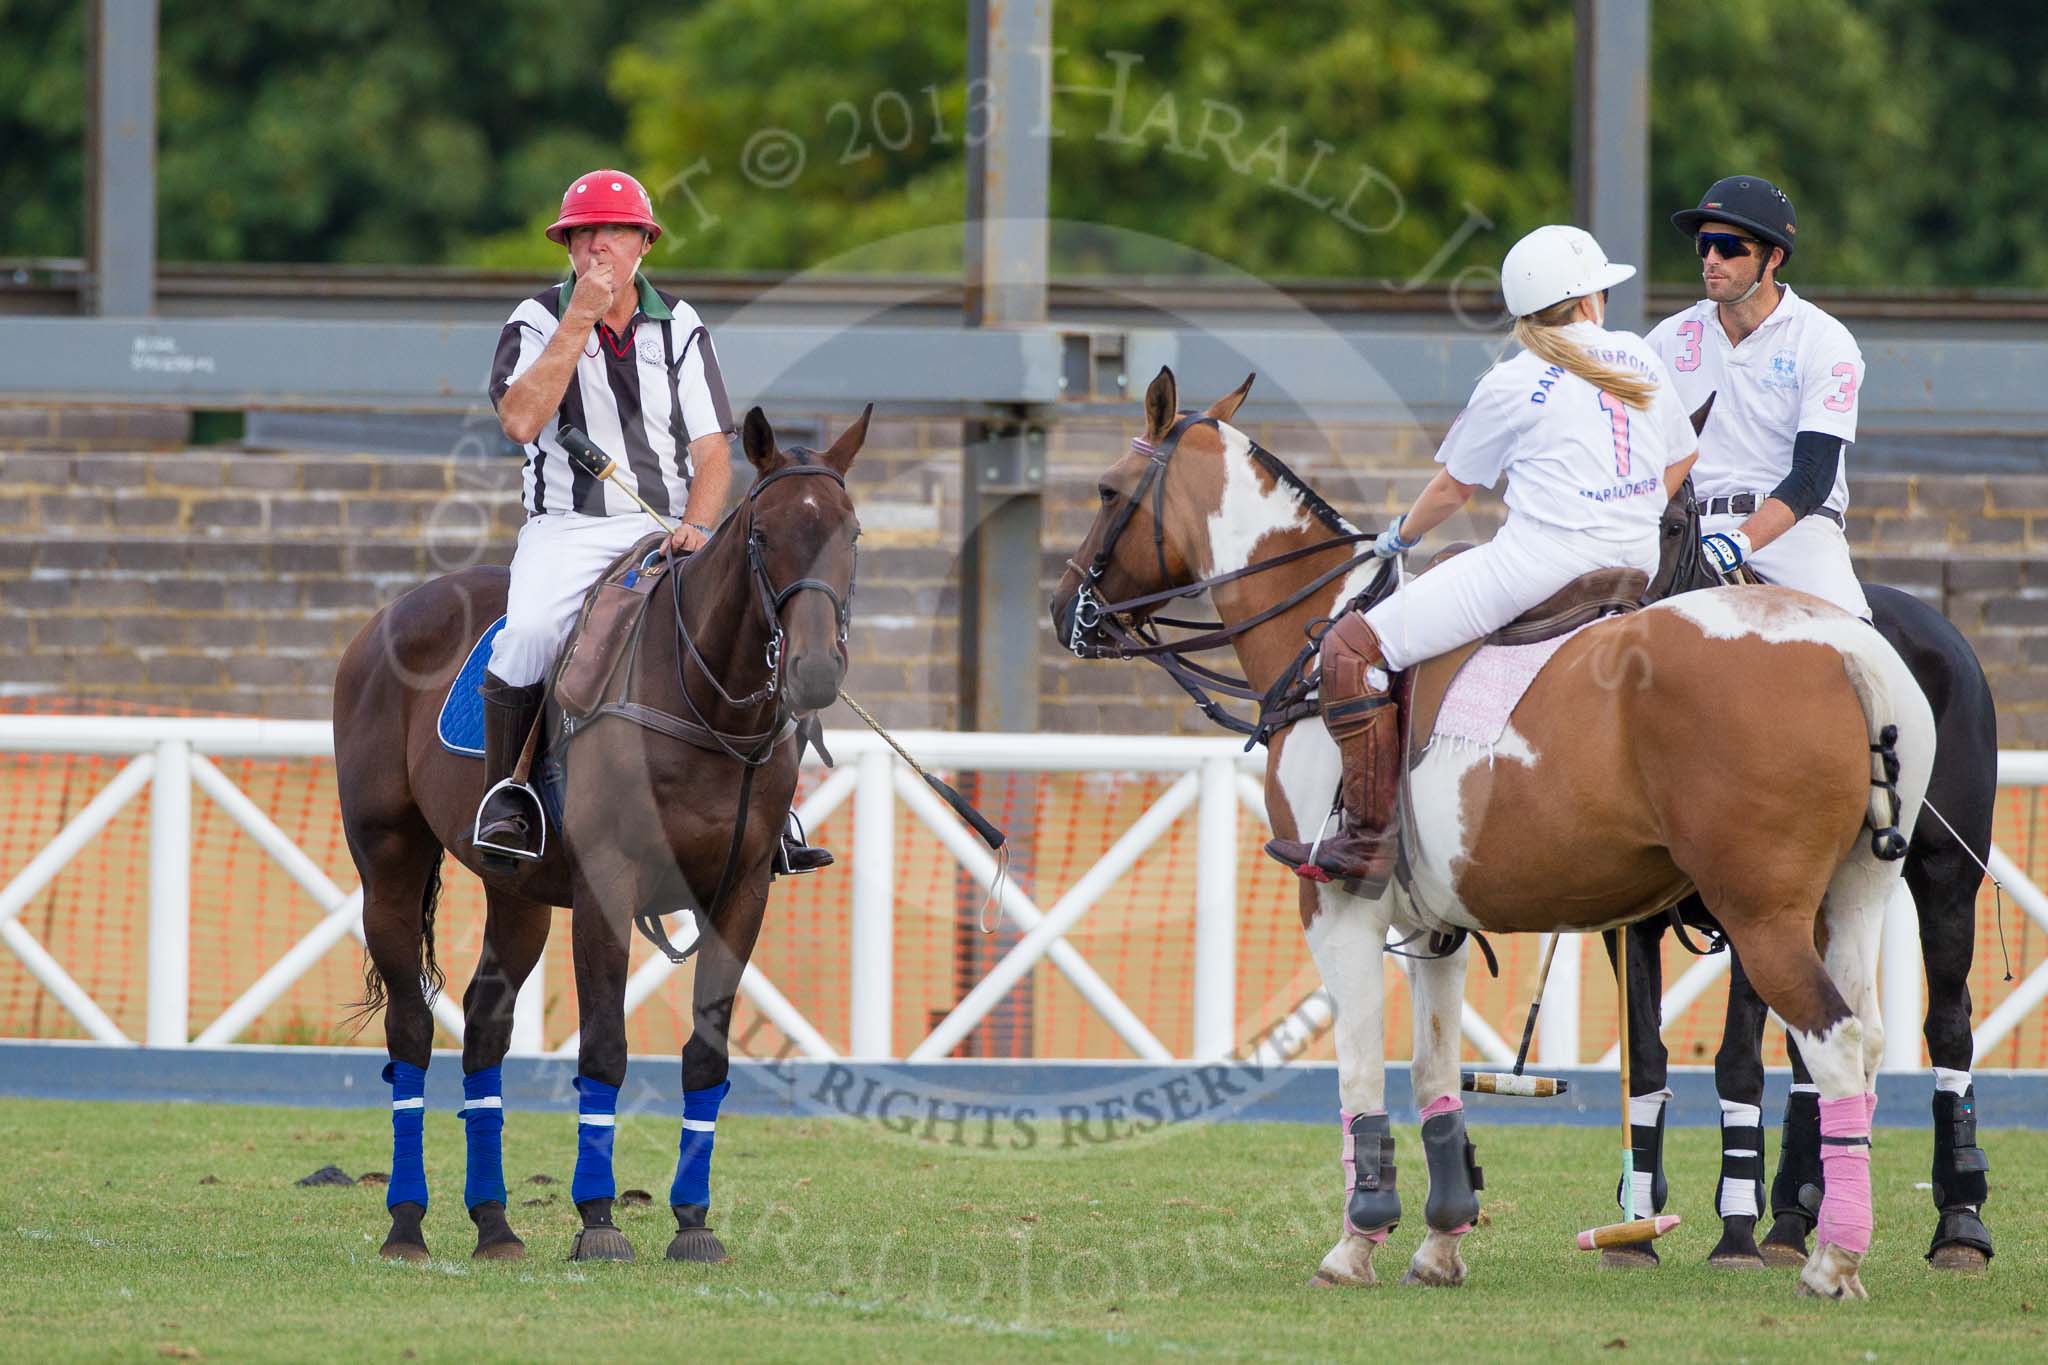 DBPC Polo in the Park 2013, Subsidiary Final Tusk Trophy (4 Goal), Dawson Group vs High Point.
Dallas Burston Polo Club, ,
Southam,
Warwickshire,
United Kingdom,
on 01 September 2013 at 17:42, image #651